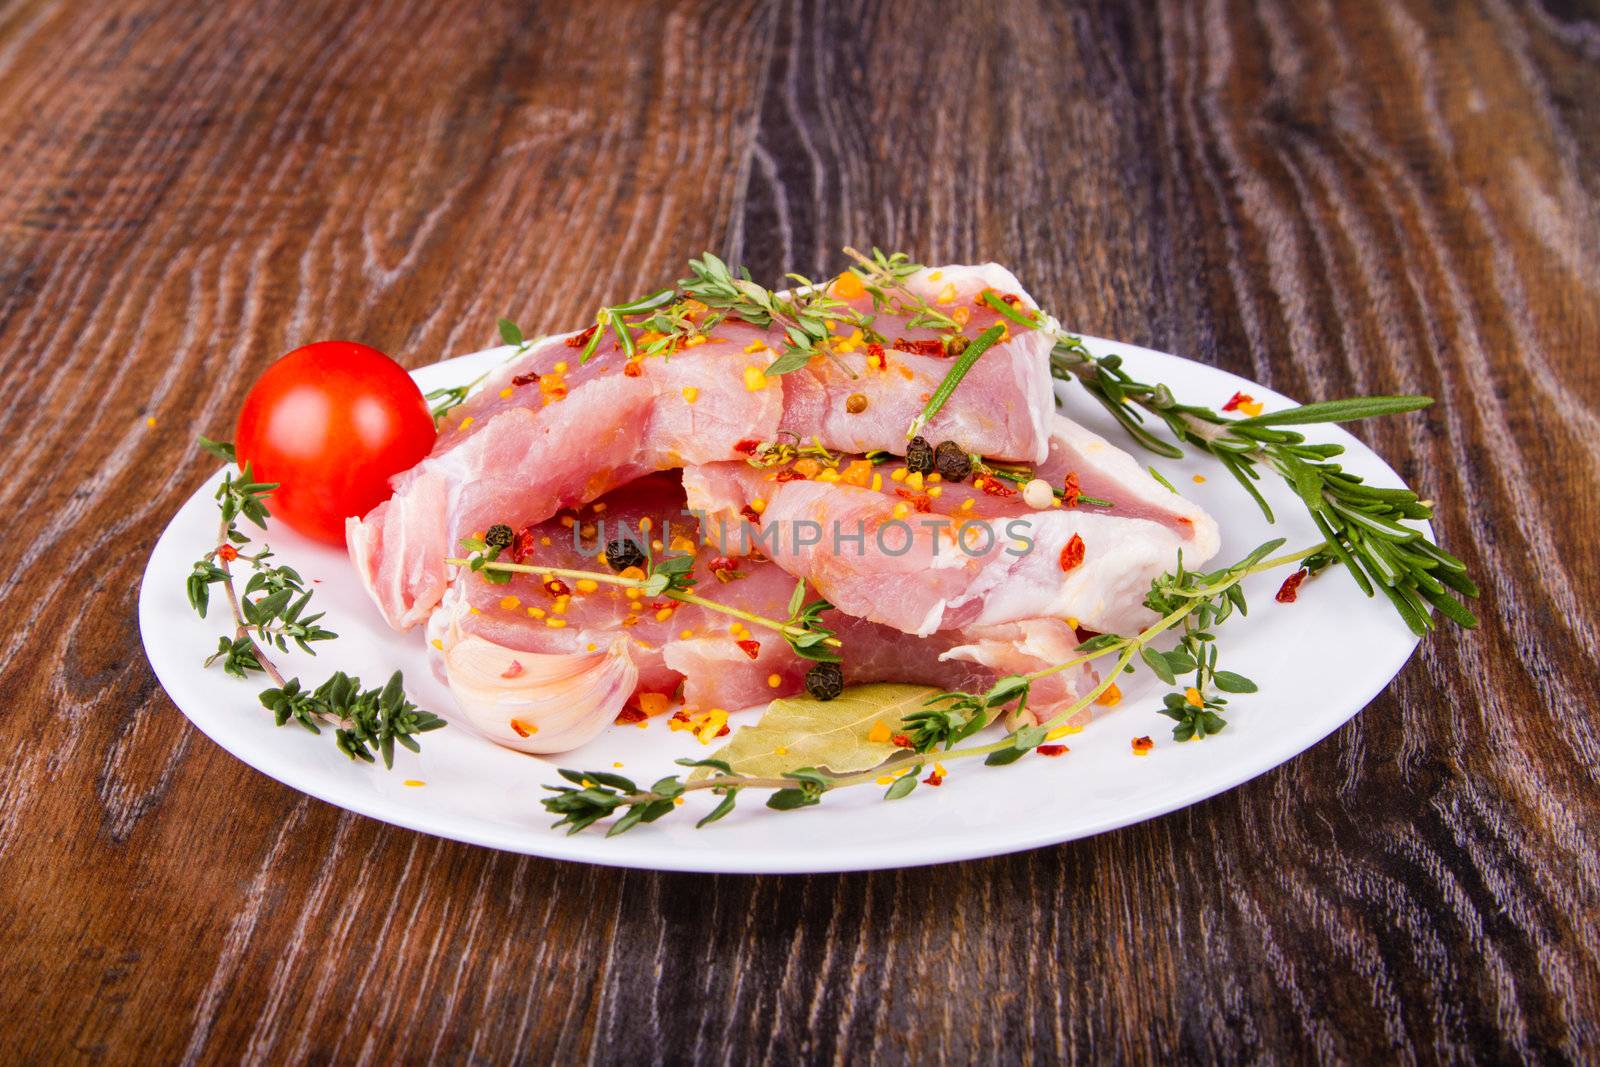 Raw fresh meat on a plate with condiments and fresh vegetables